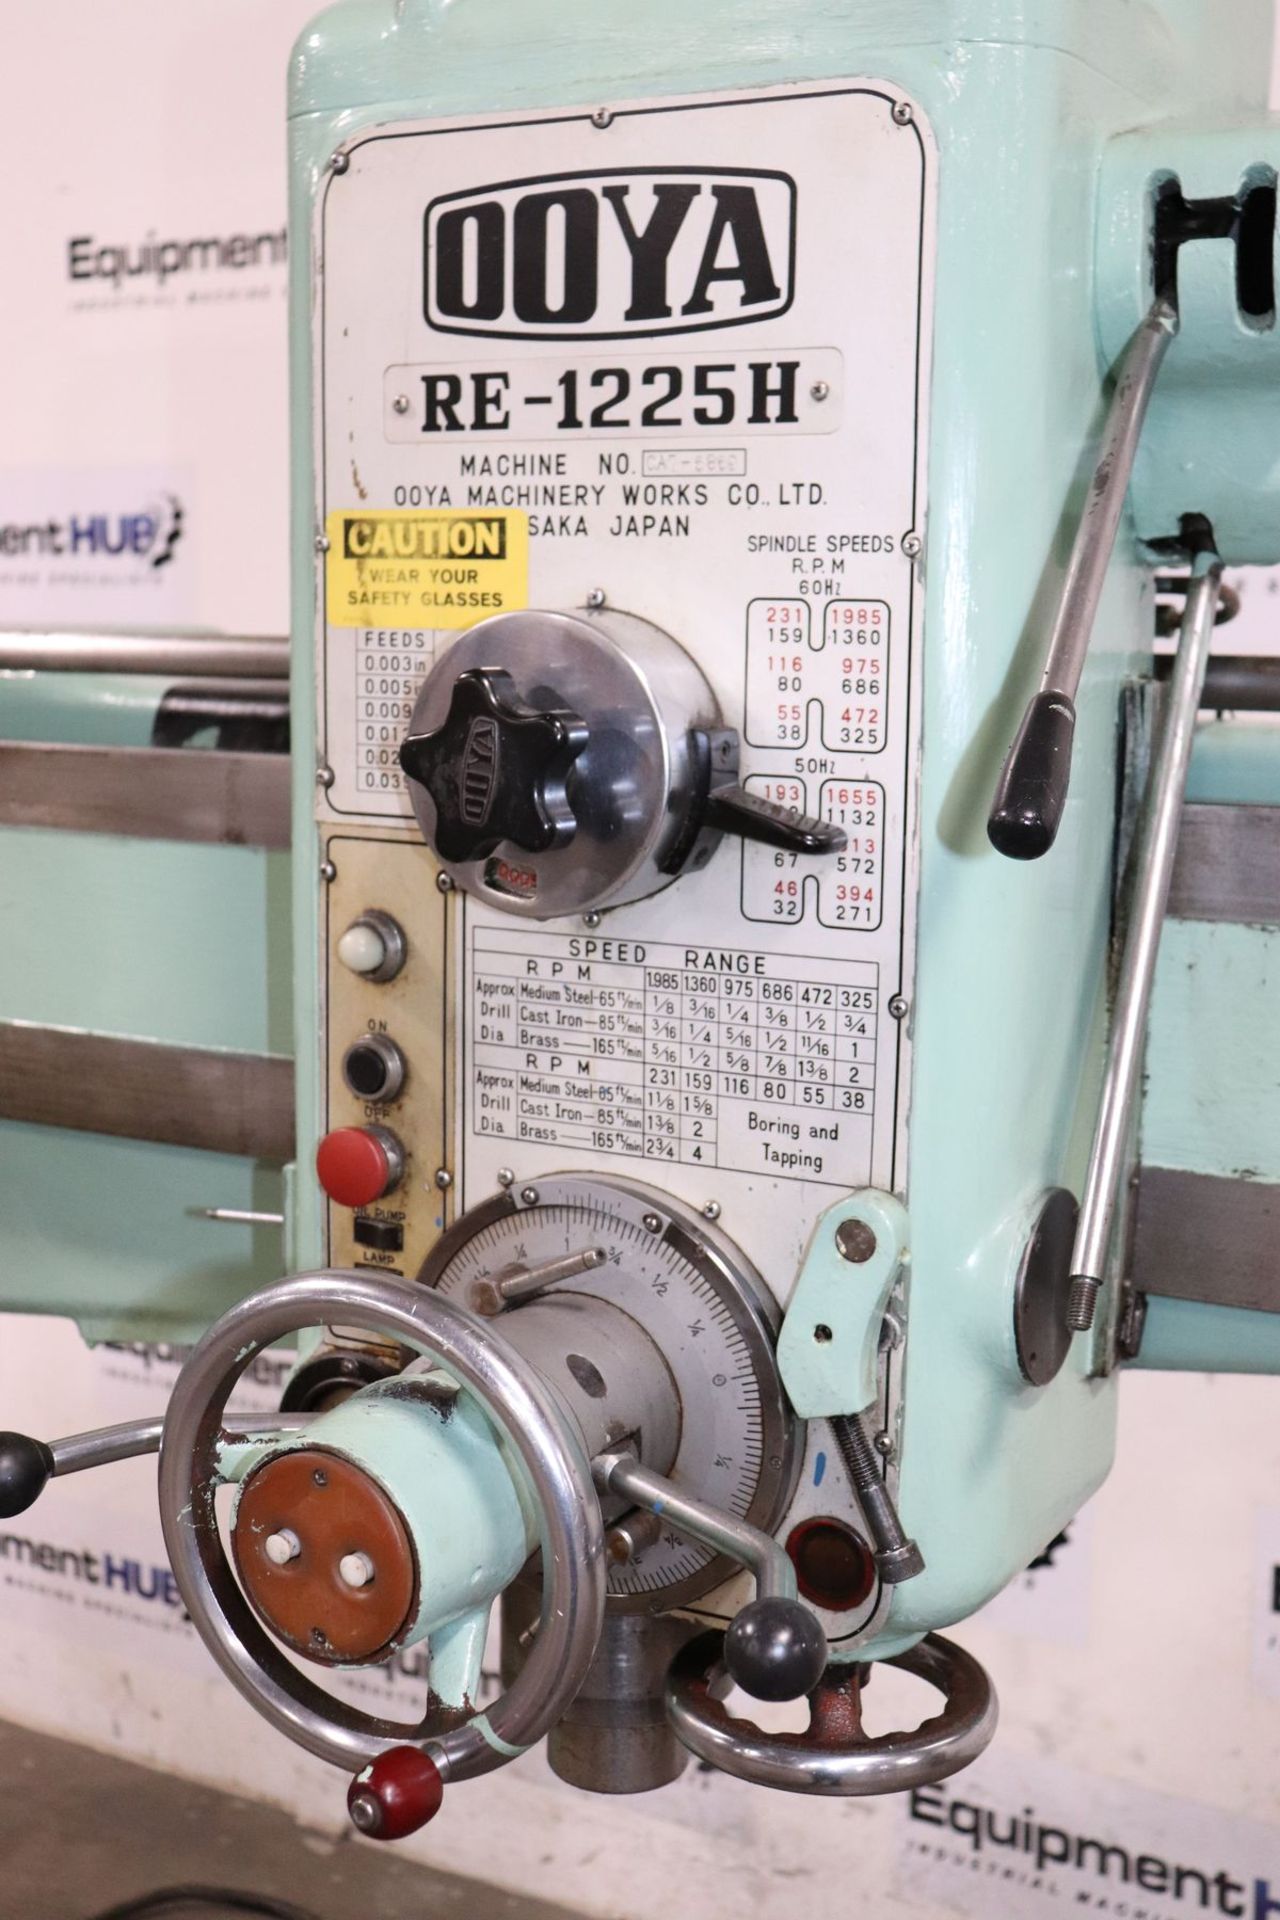 Ooya RE-1225H 4′ x 13″ Drilling & Tapping Radial Arm Drill - Image 6 of 11